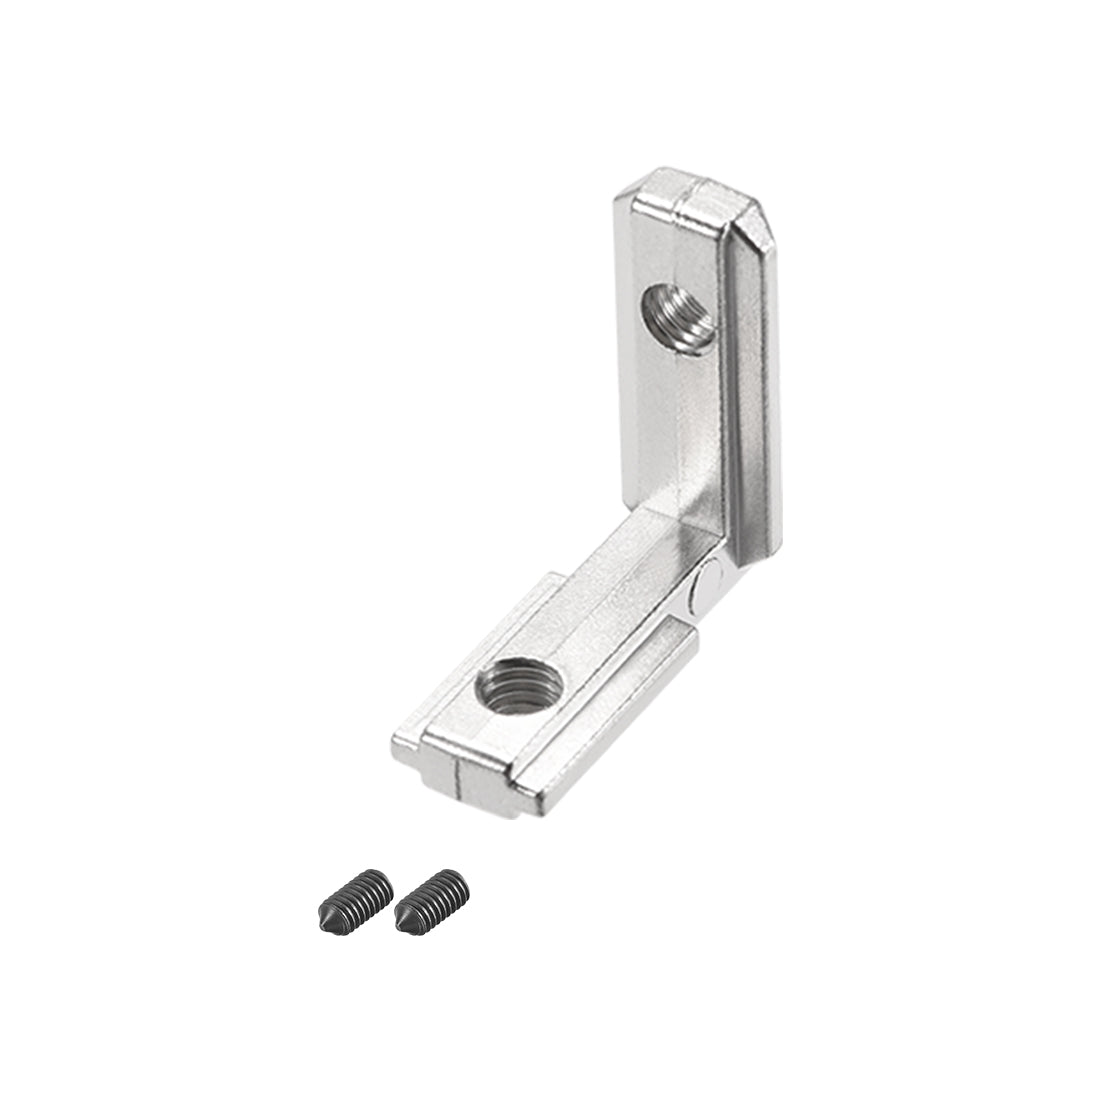 uxcell Uxcell Interior Joint Bracket, Inside Corner Connector 2020 Series Slot 6mm with Screws for Aluminum Extrusion Profile, 20 Pcs